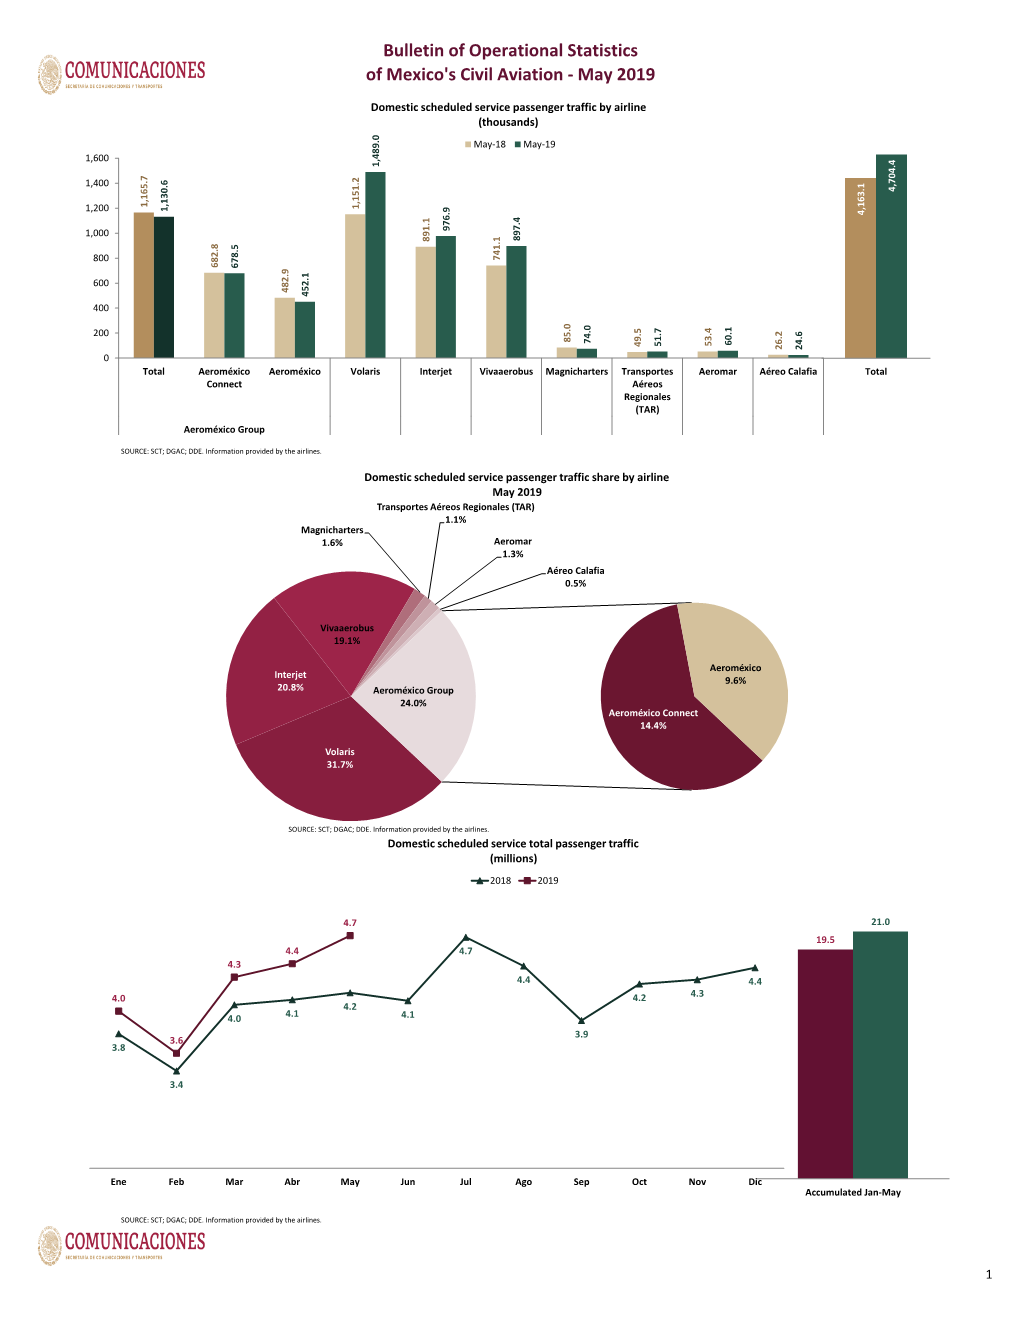 Bulletin of Operational Statistics of Mexico's Civil Aviation - May 2019